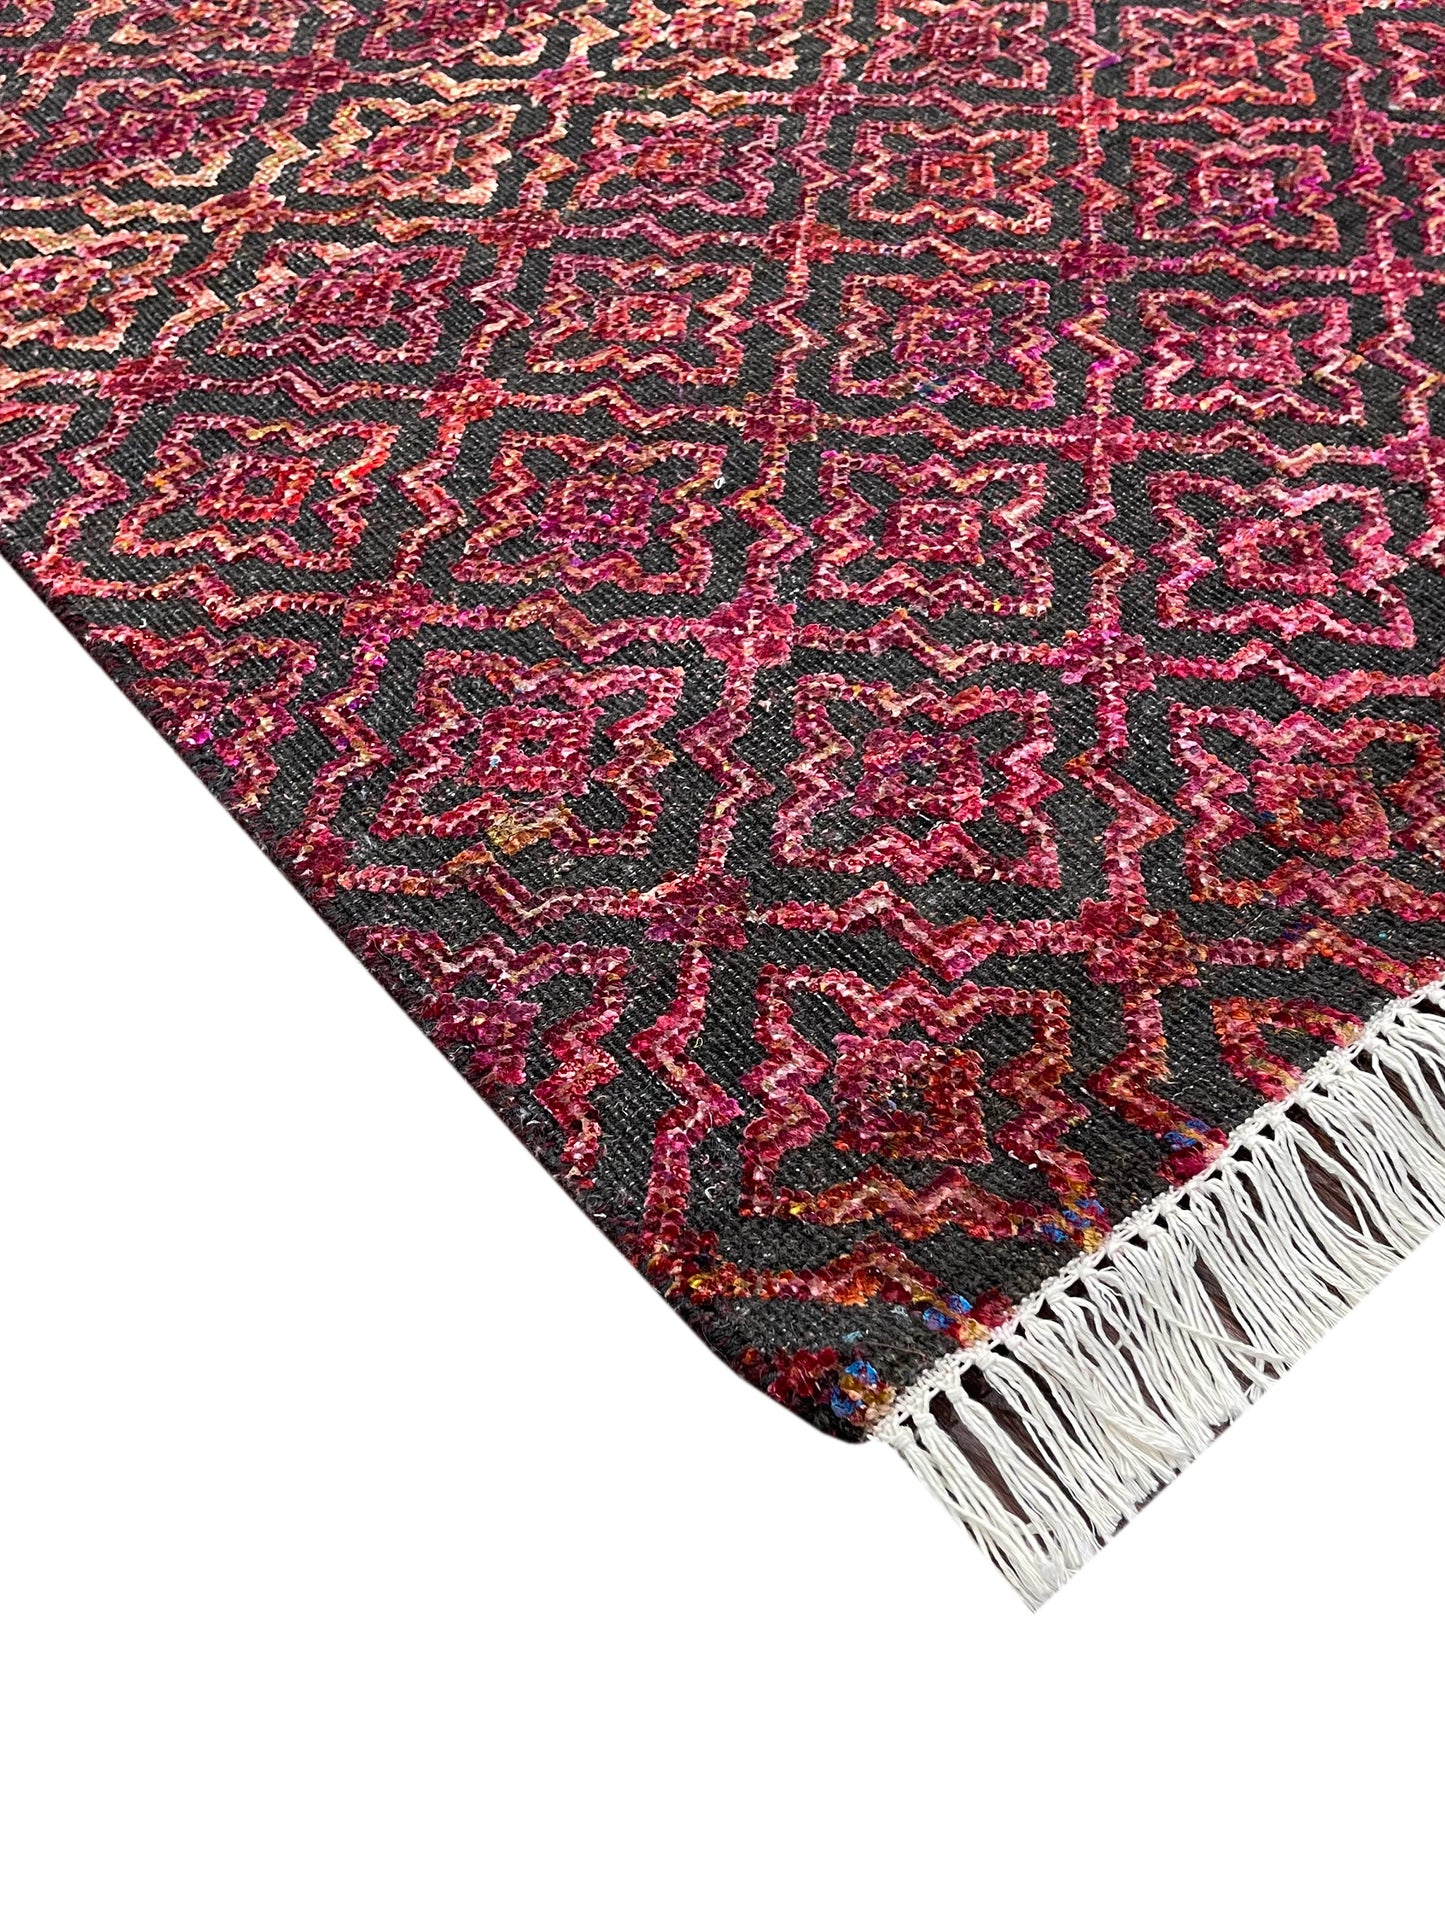 Get trendy with Contemporary Handknotted Runner Rug Red and Black 3X11.9ft 92x357cms - Runner Rugs available at Jaipur Oriental Rugs. Grab yours for $2115.00 today!